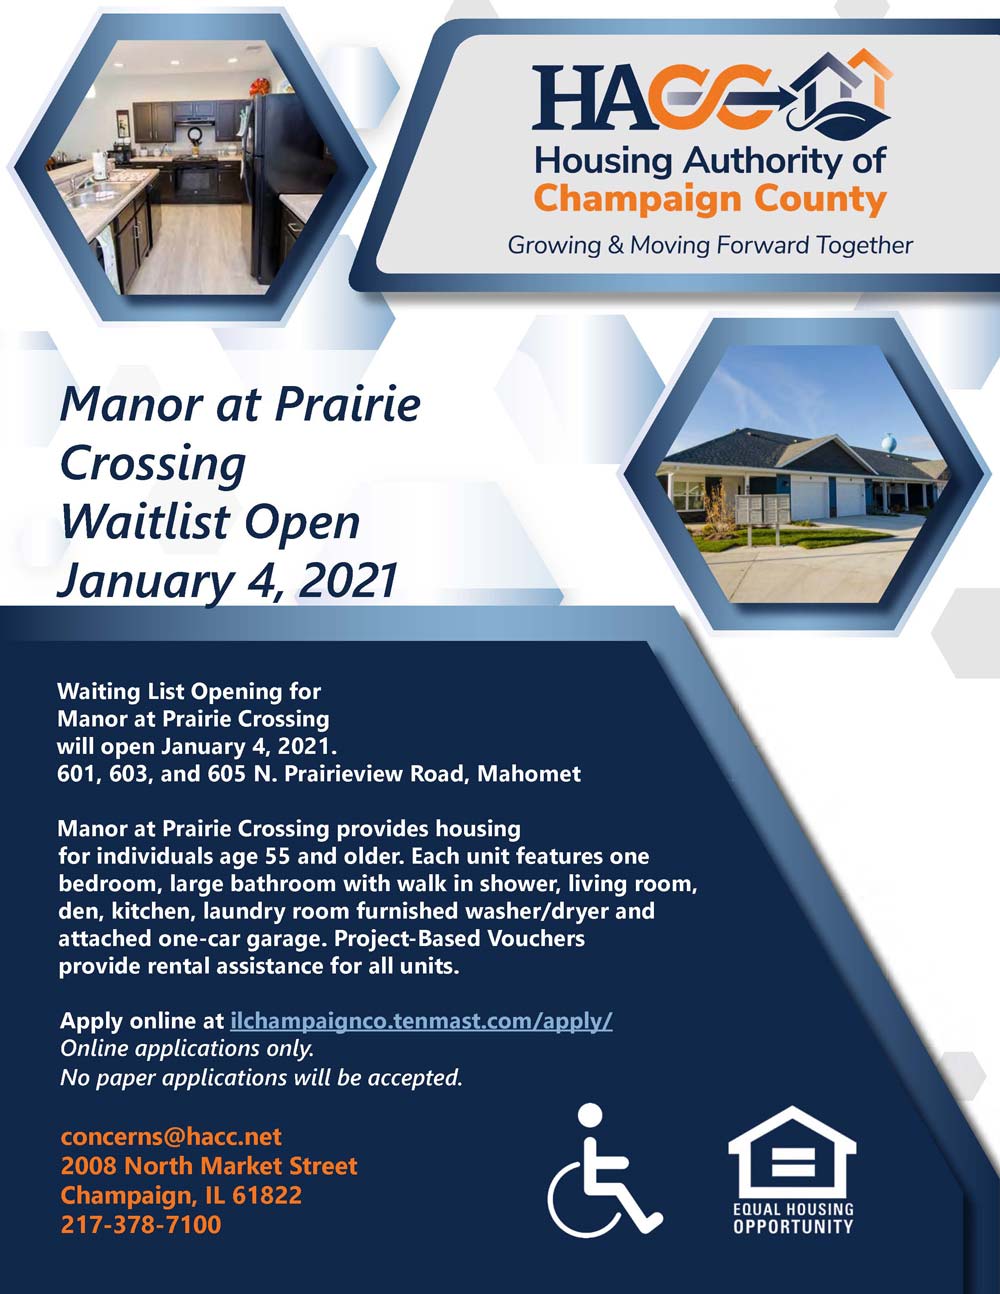 Manor at Prairie Crossing Waitlist flyer, all information as listed below.